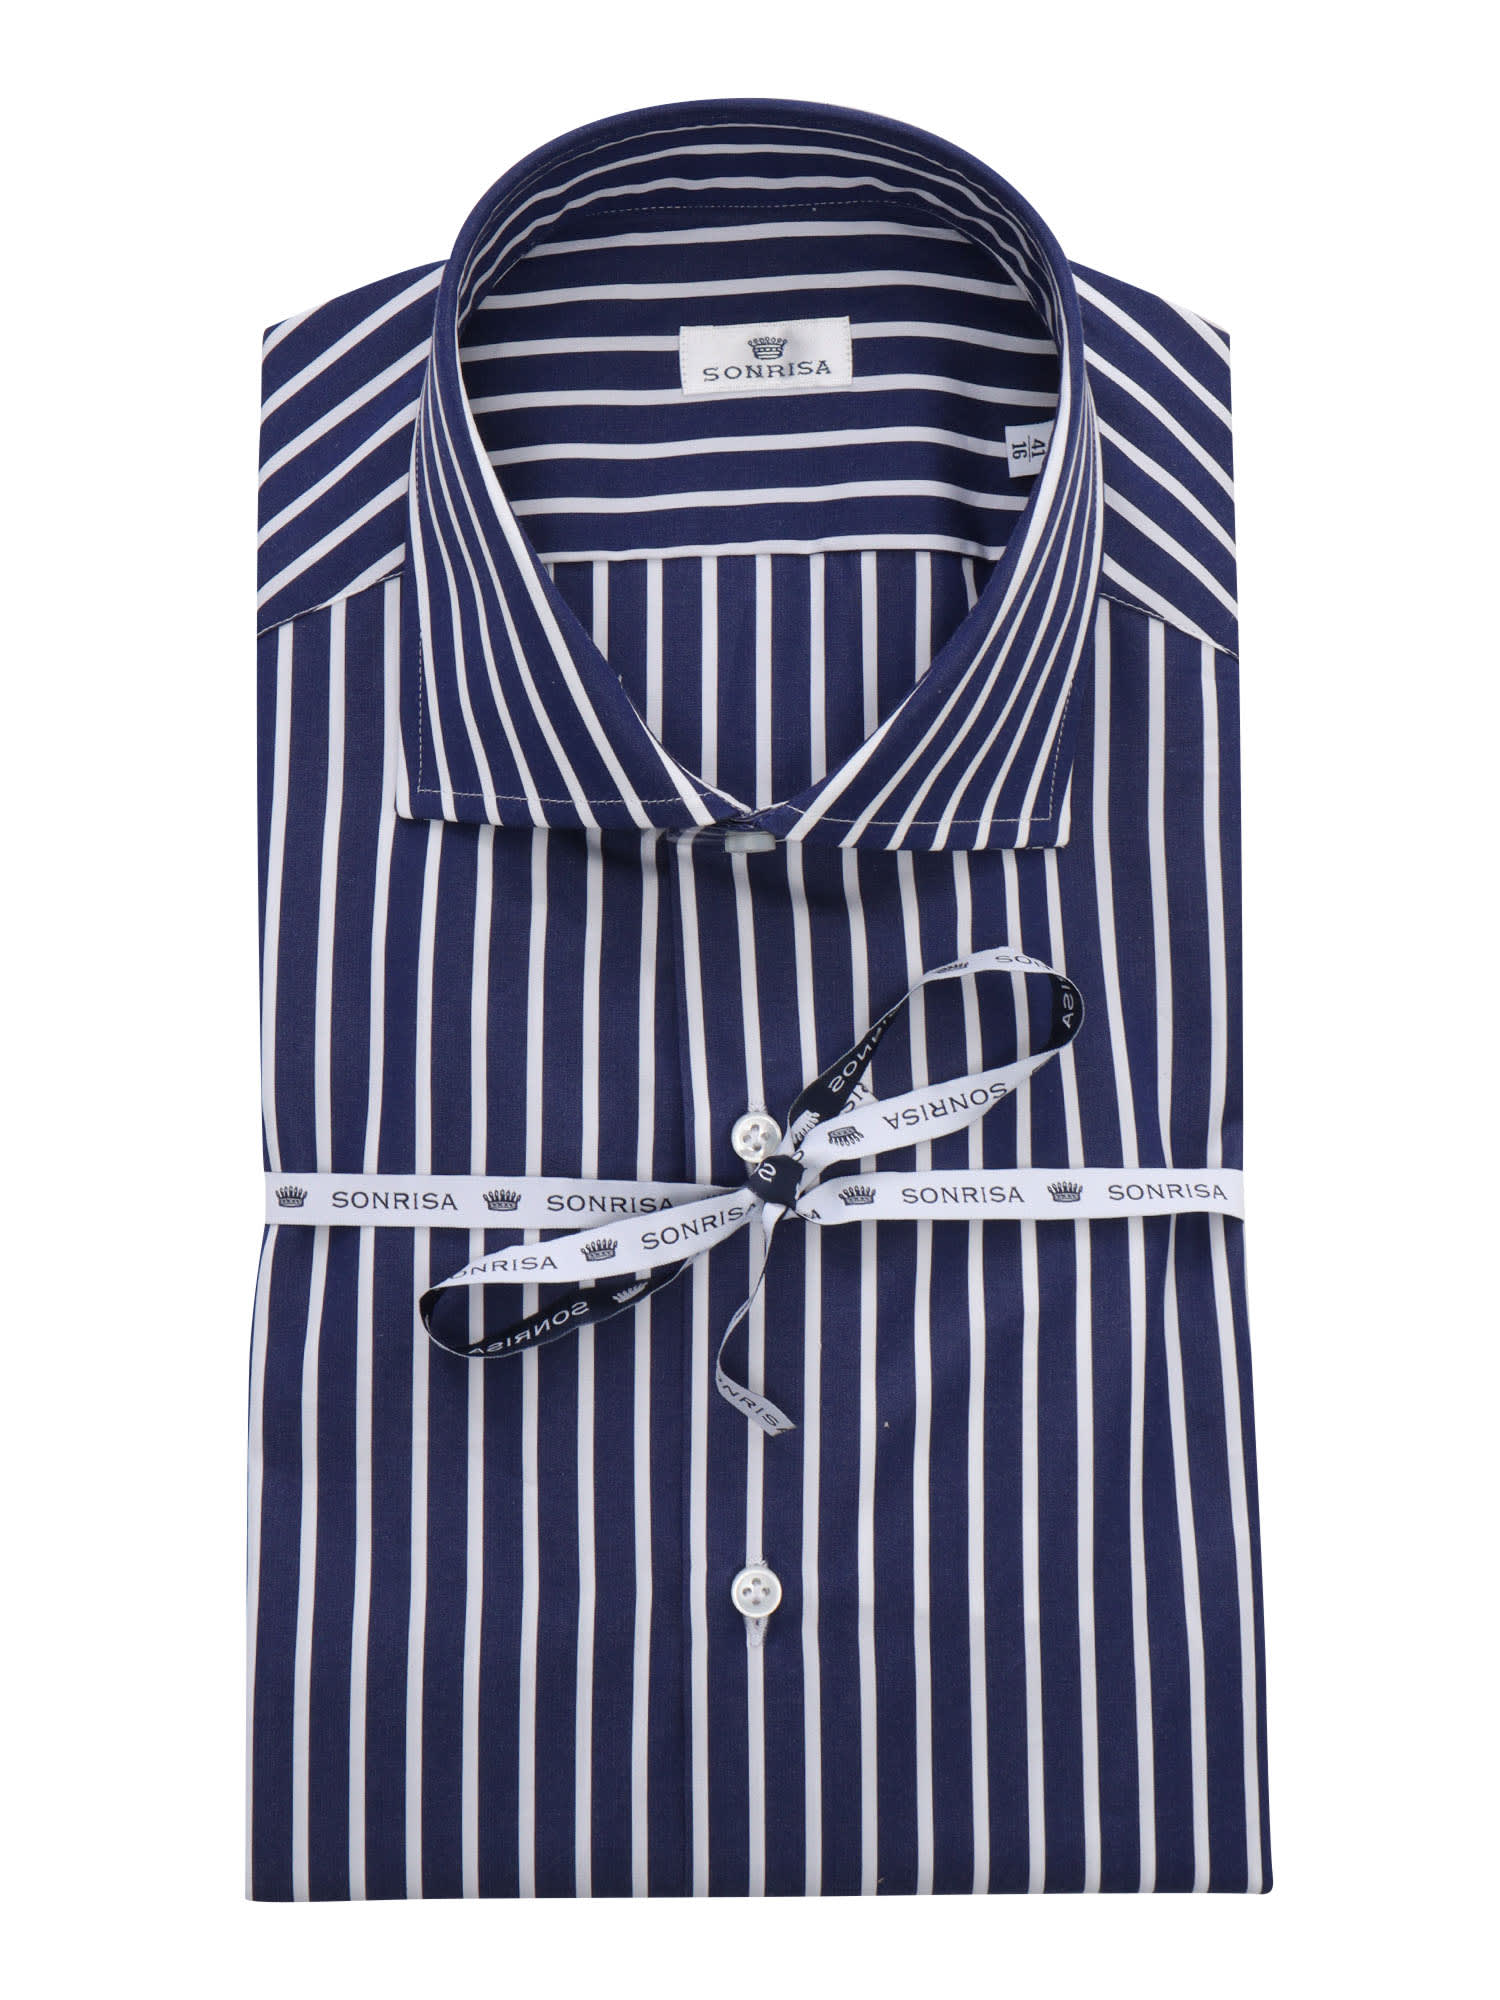 Blue And White Striped Shirt